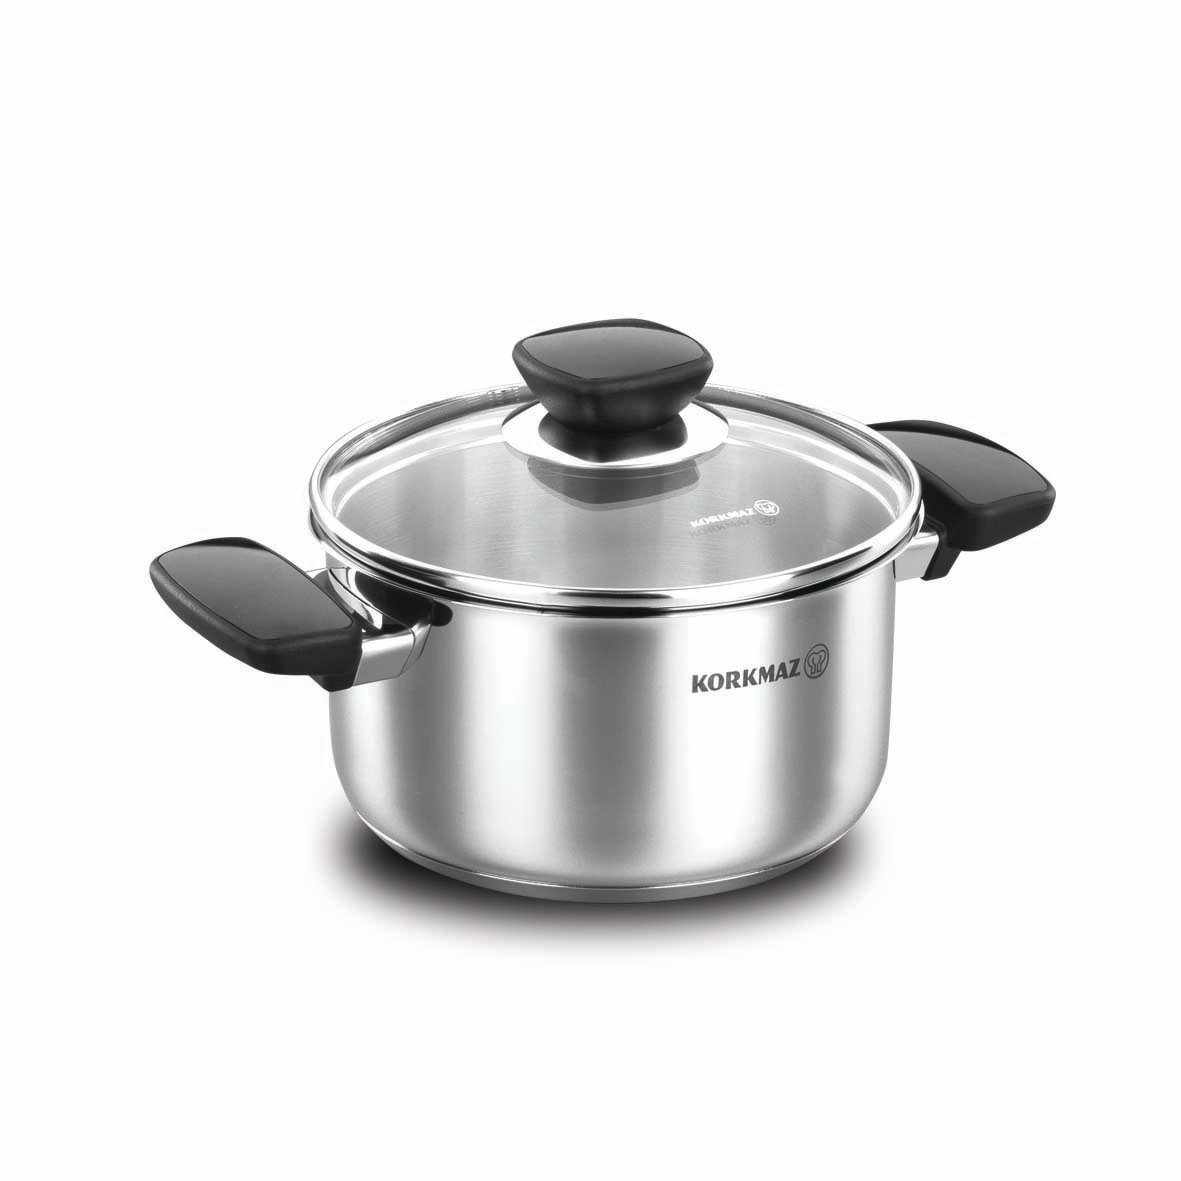 Korkmaz A1684-1 2.4 Qt. Cookware Casserole 18 By 10 Stainless Steel Sauce Pan With Glass Lid